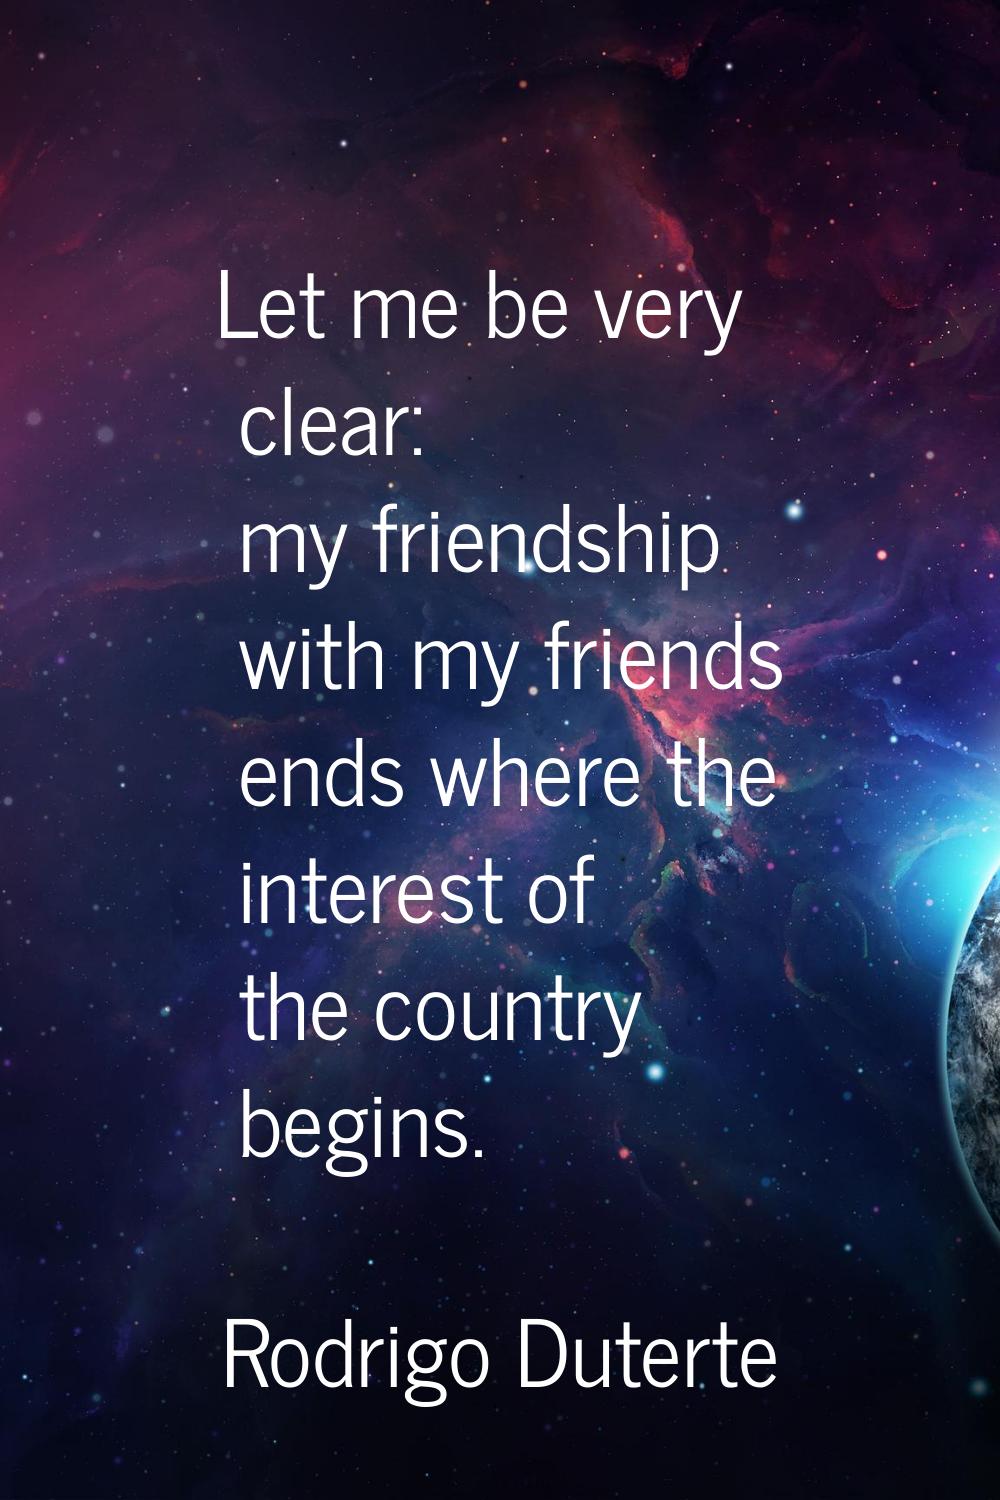 Let me be very clear: my friendship with my friends ends where the interest of the country begins.